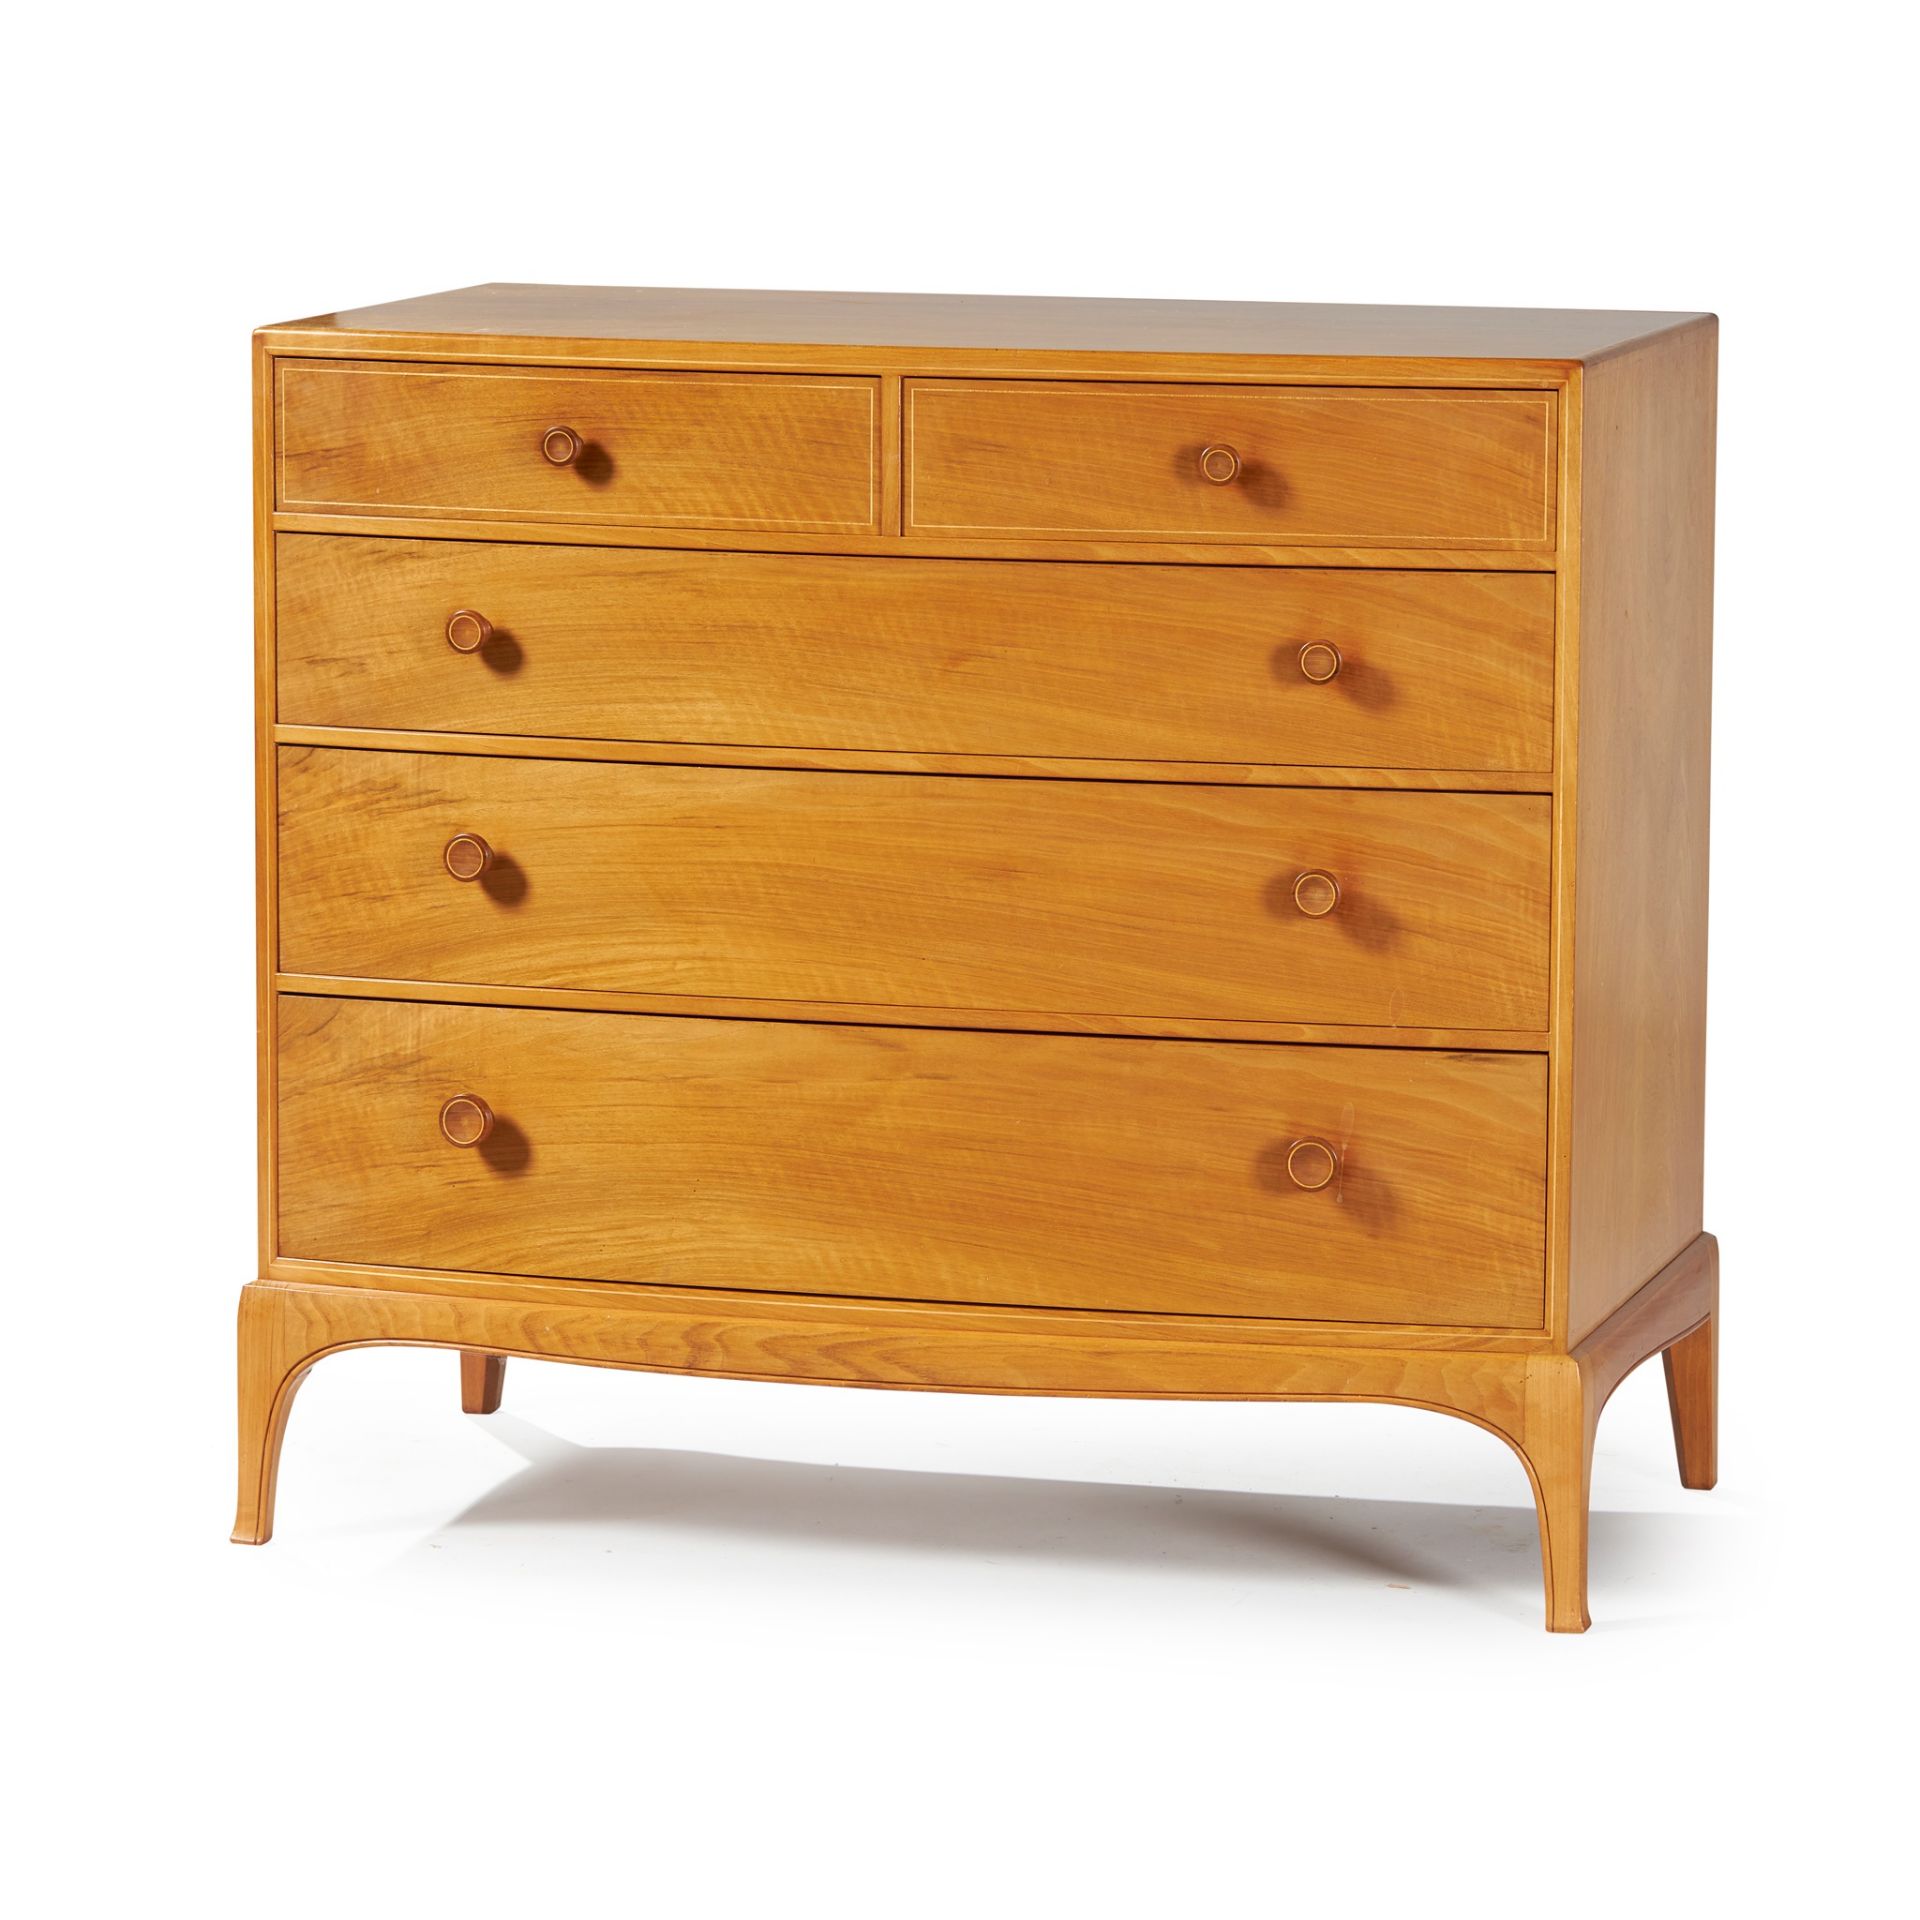 EDWARD BARNSLEY (1900-1987) BOW-FRONT CHEST OF DRAWERS, DATED 1966 - Image 3 of 3